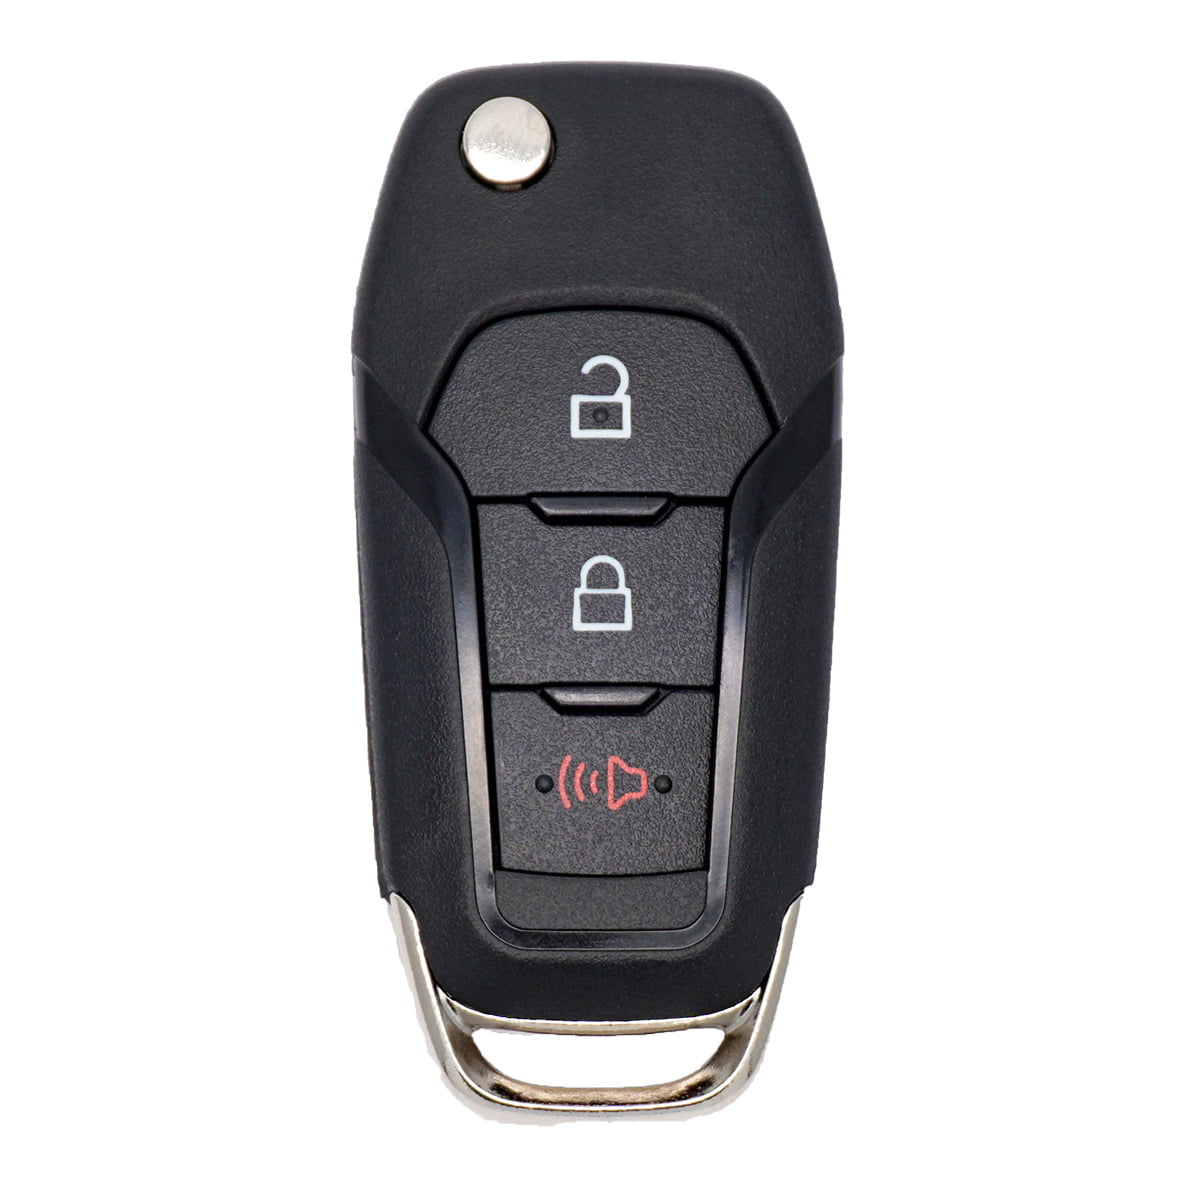 How To Replace Ford F150 Key